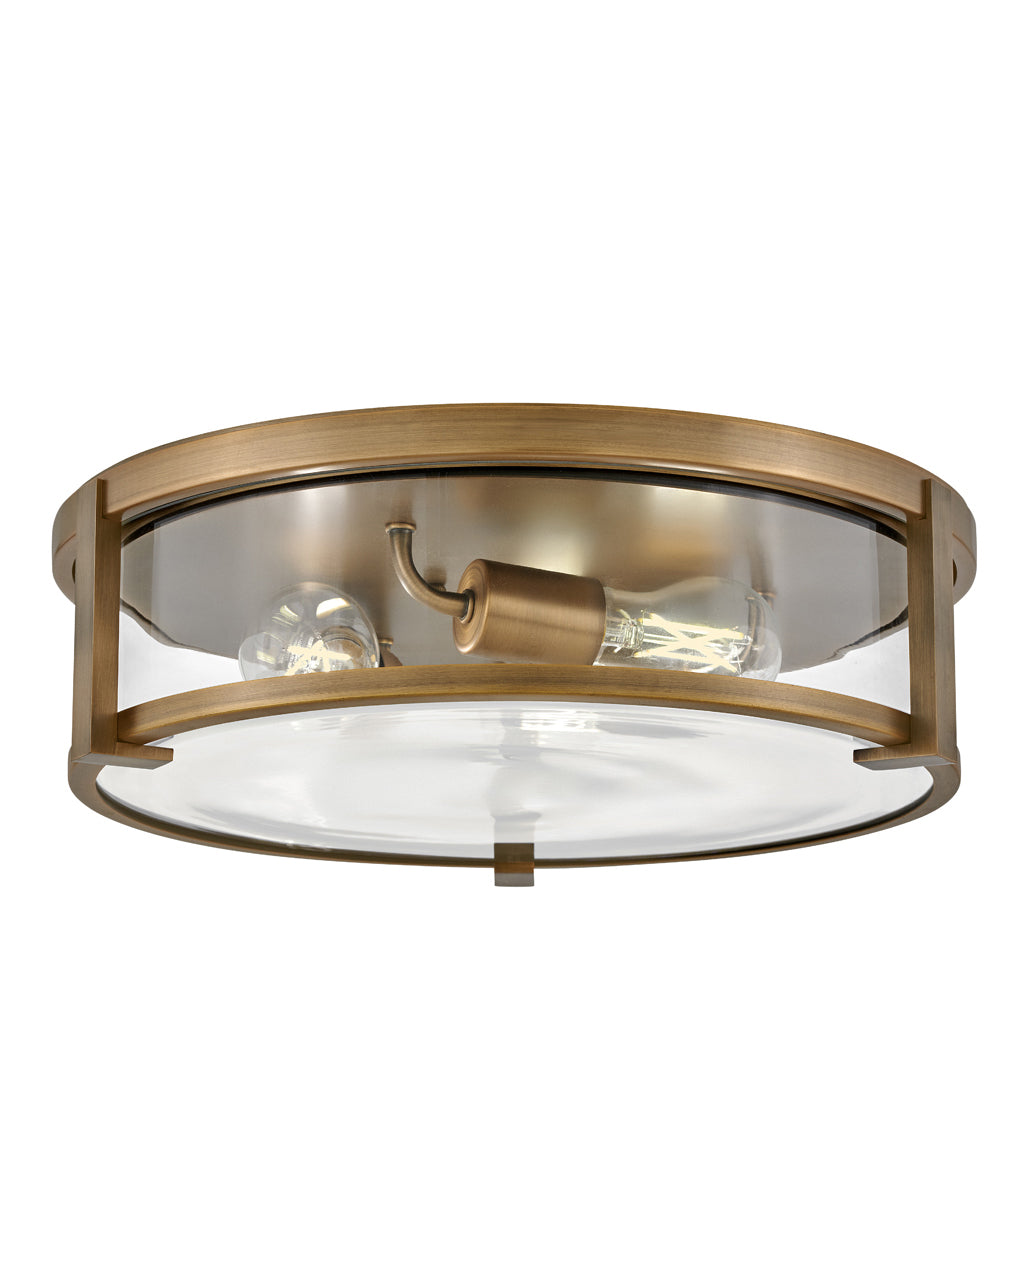 Hinkley Lowell Flush Mount Flush Mount Ceiling Light Hinkley Brushed Bronze with Clear glass 16.0x16.0x4.75 